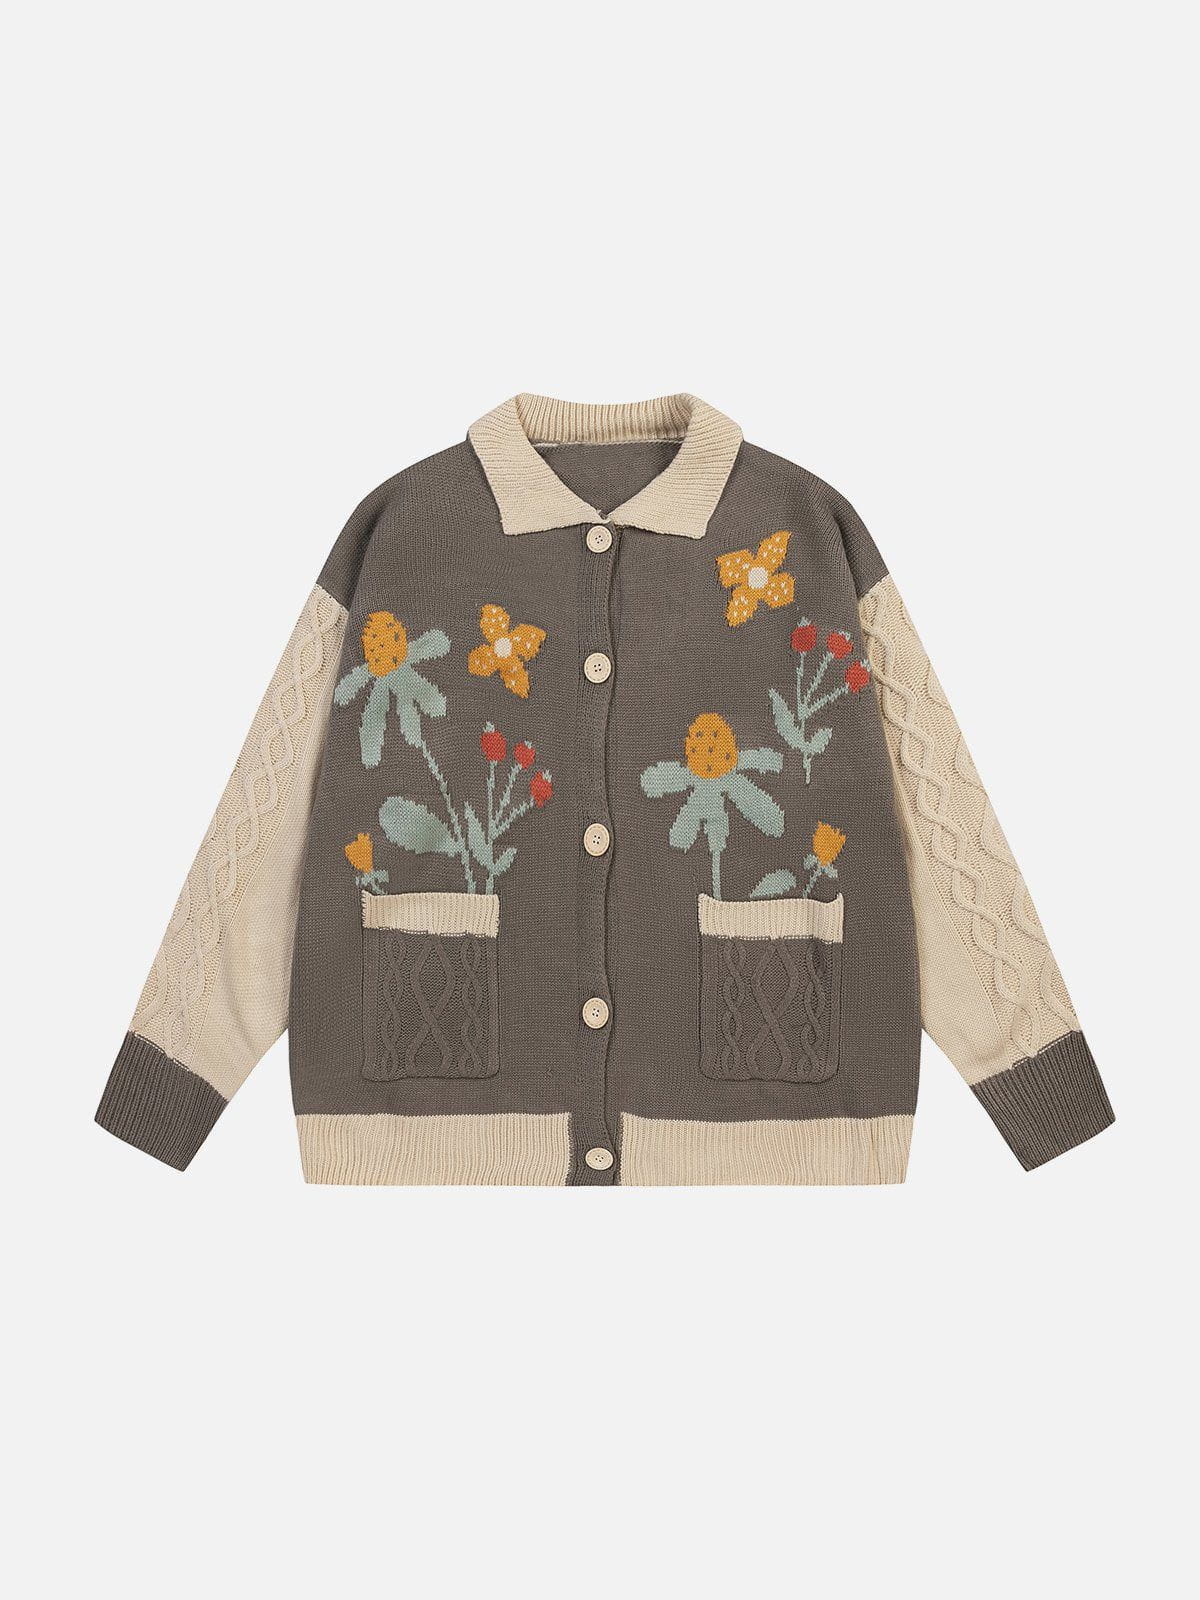 Sneakerland® - Flowers Knit Polo Cardigan